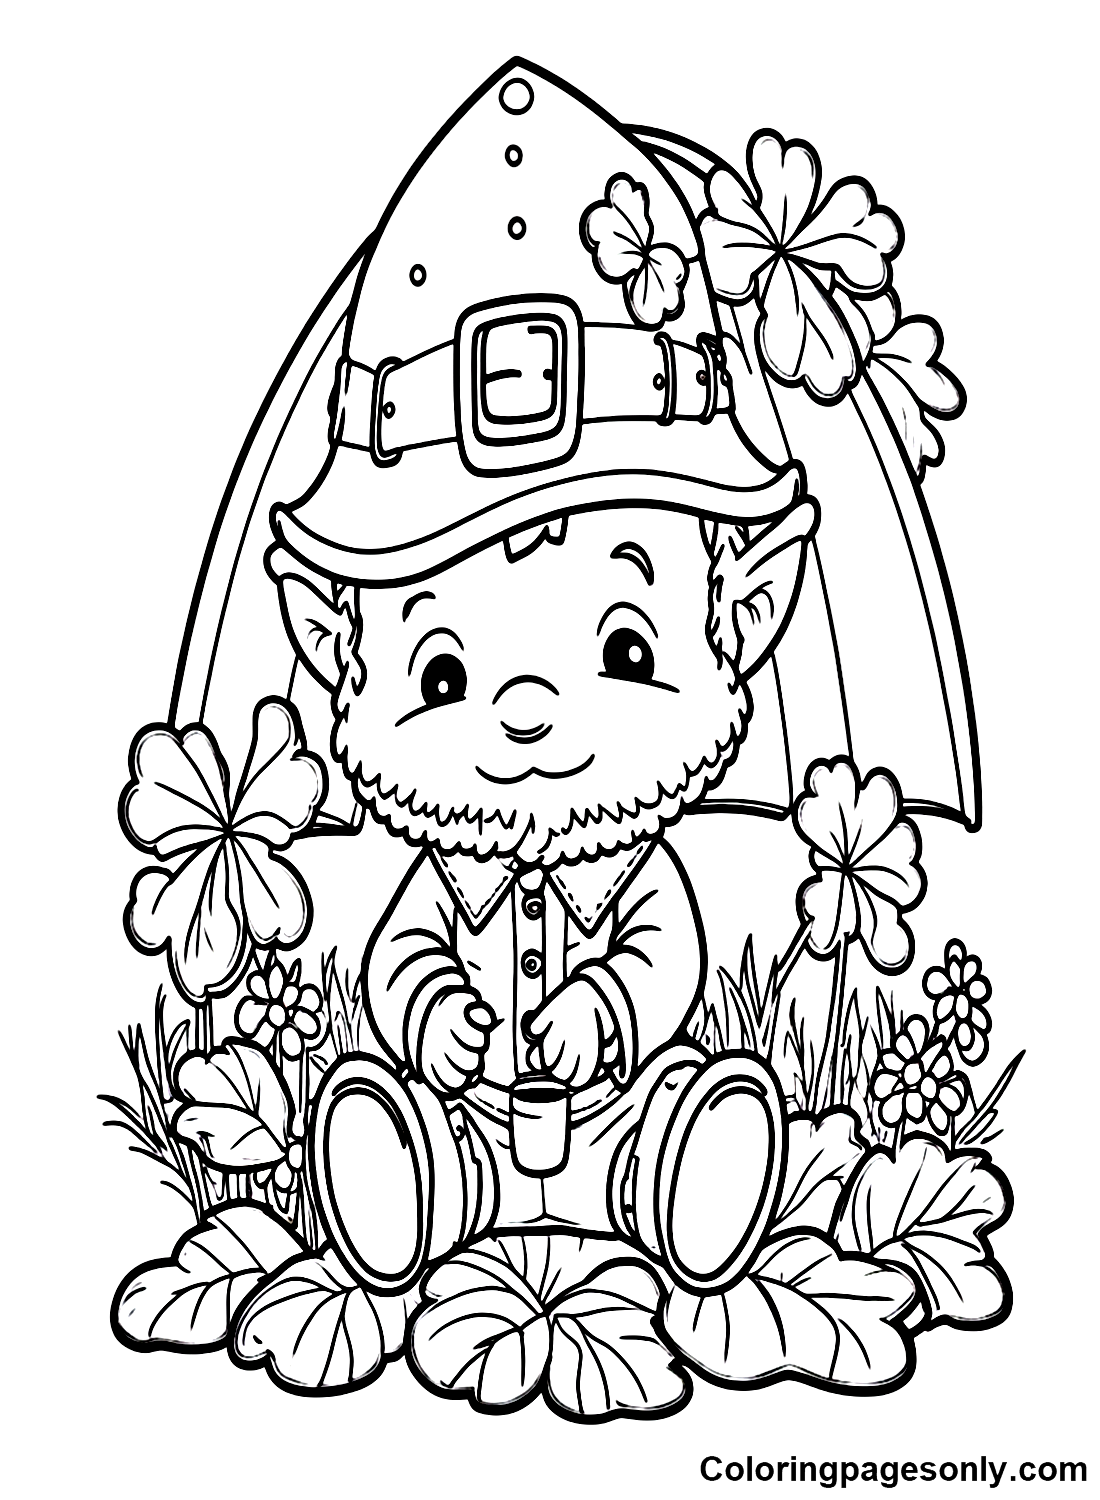 Cute Leprechaun on Shamrock Coloring Pages